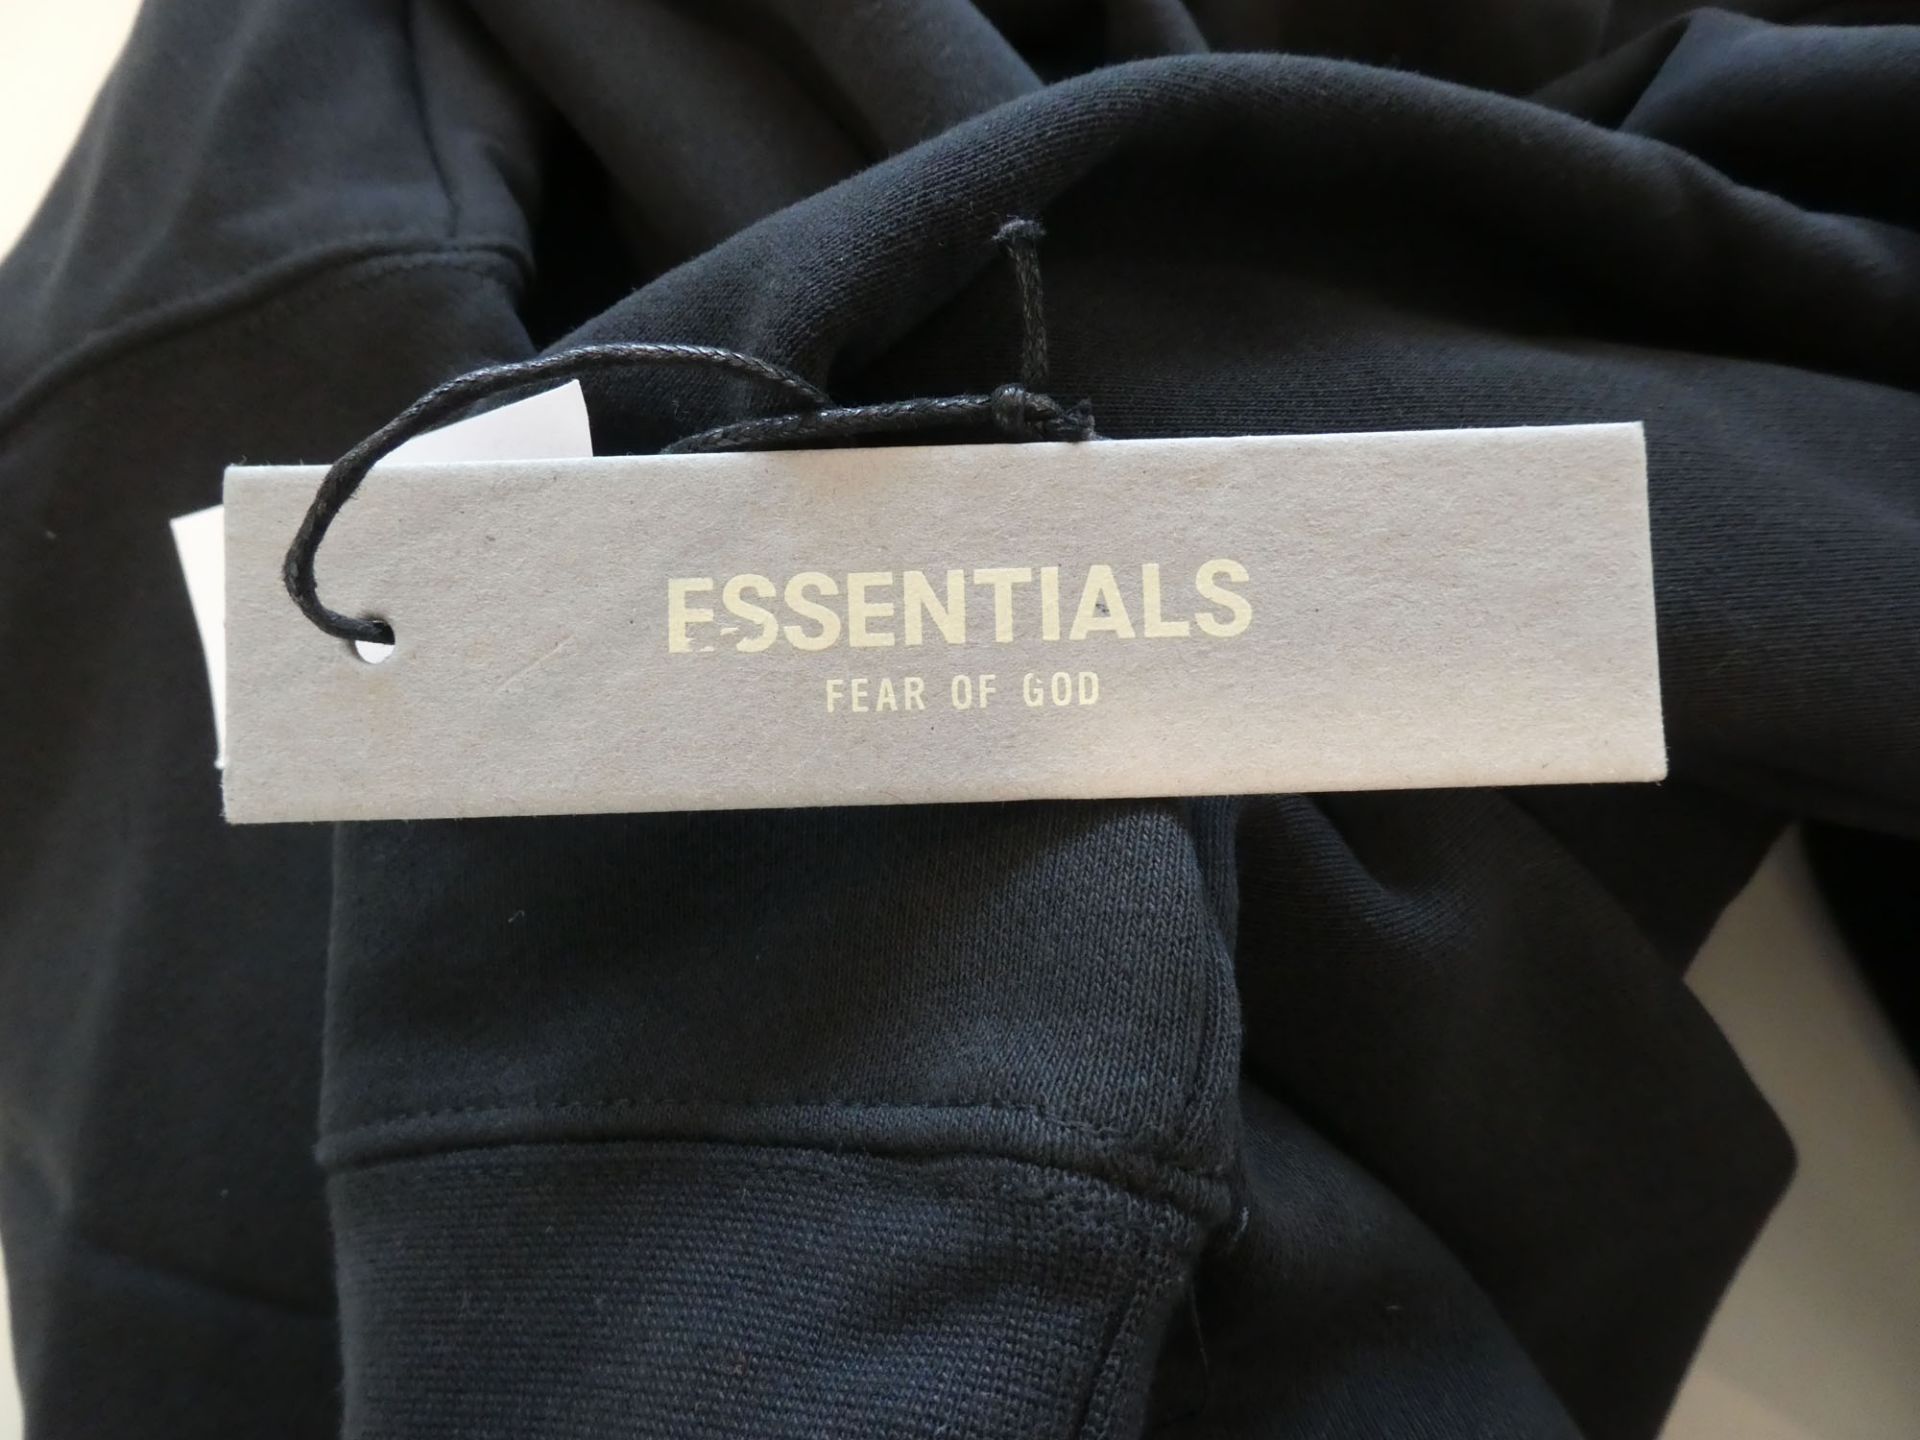 Essentials Fear of God hoodie in black size S - Image 5 of 5